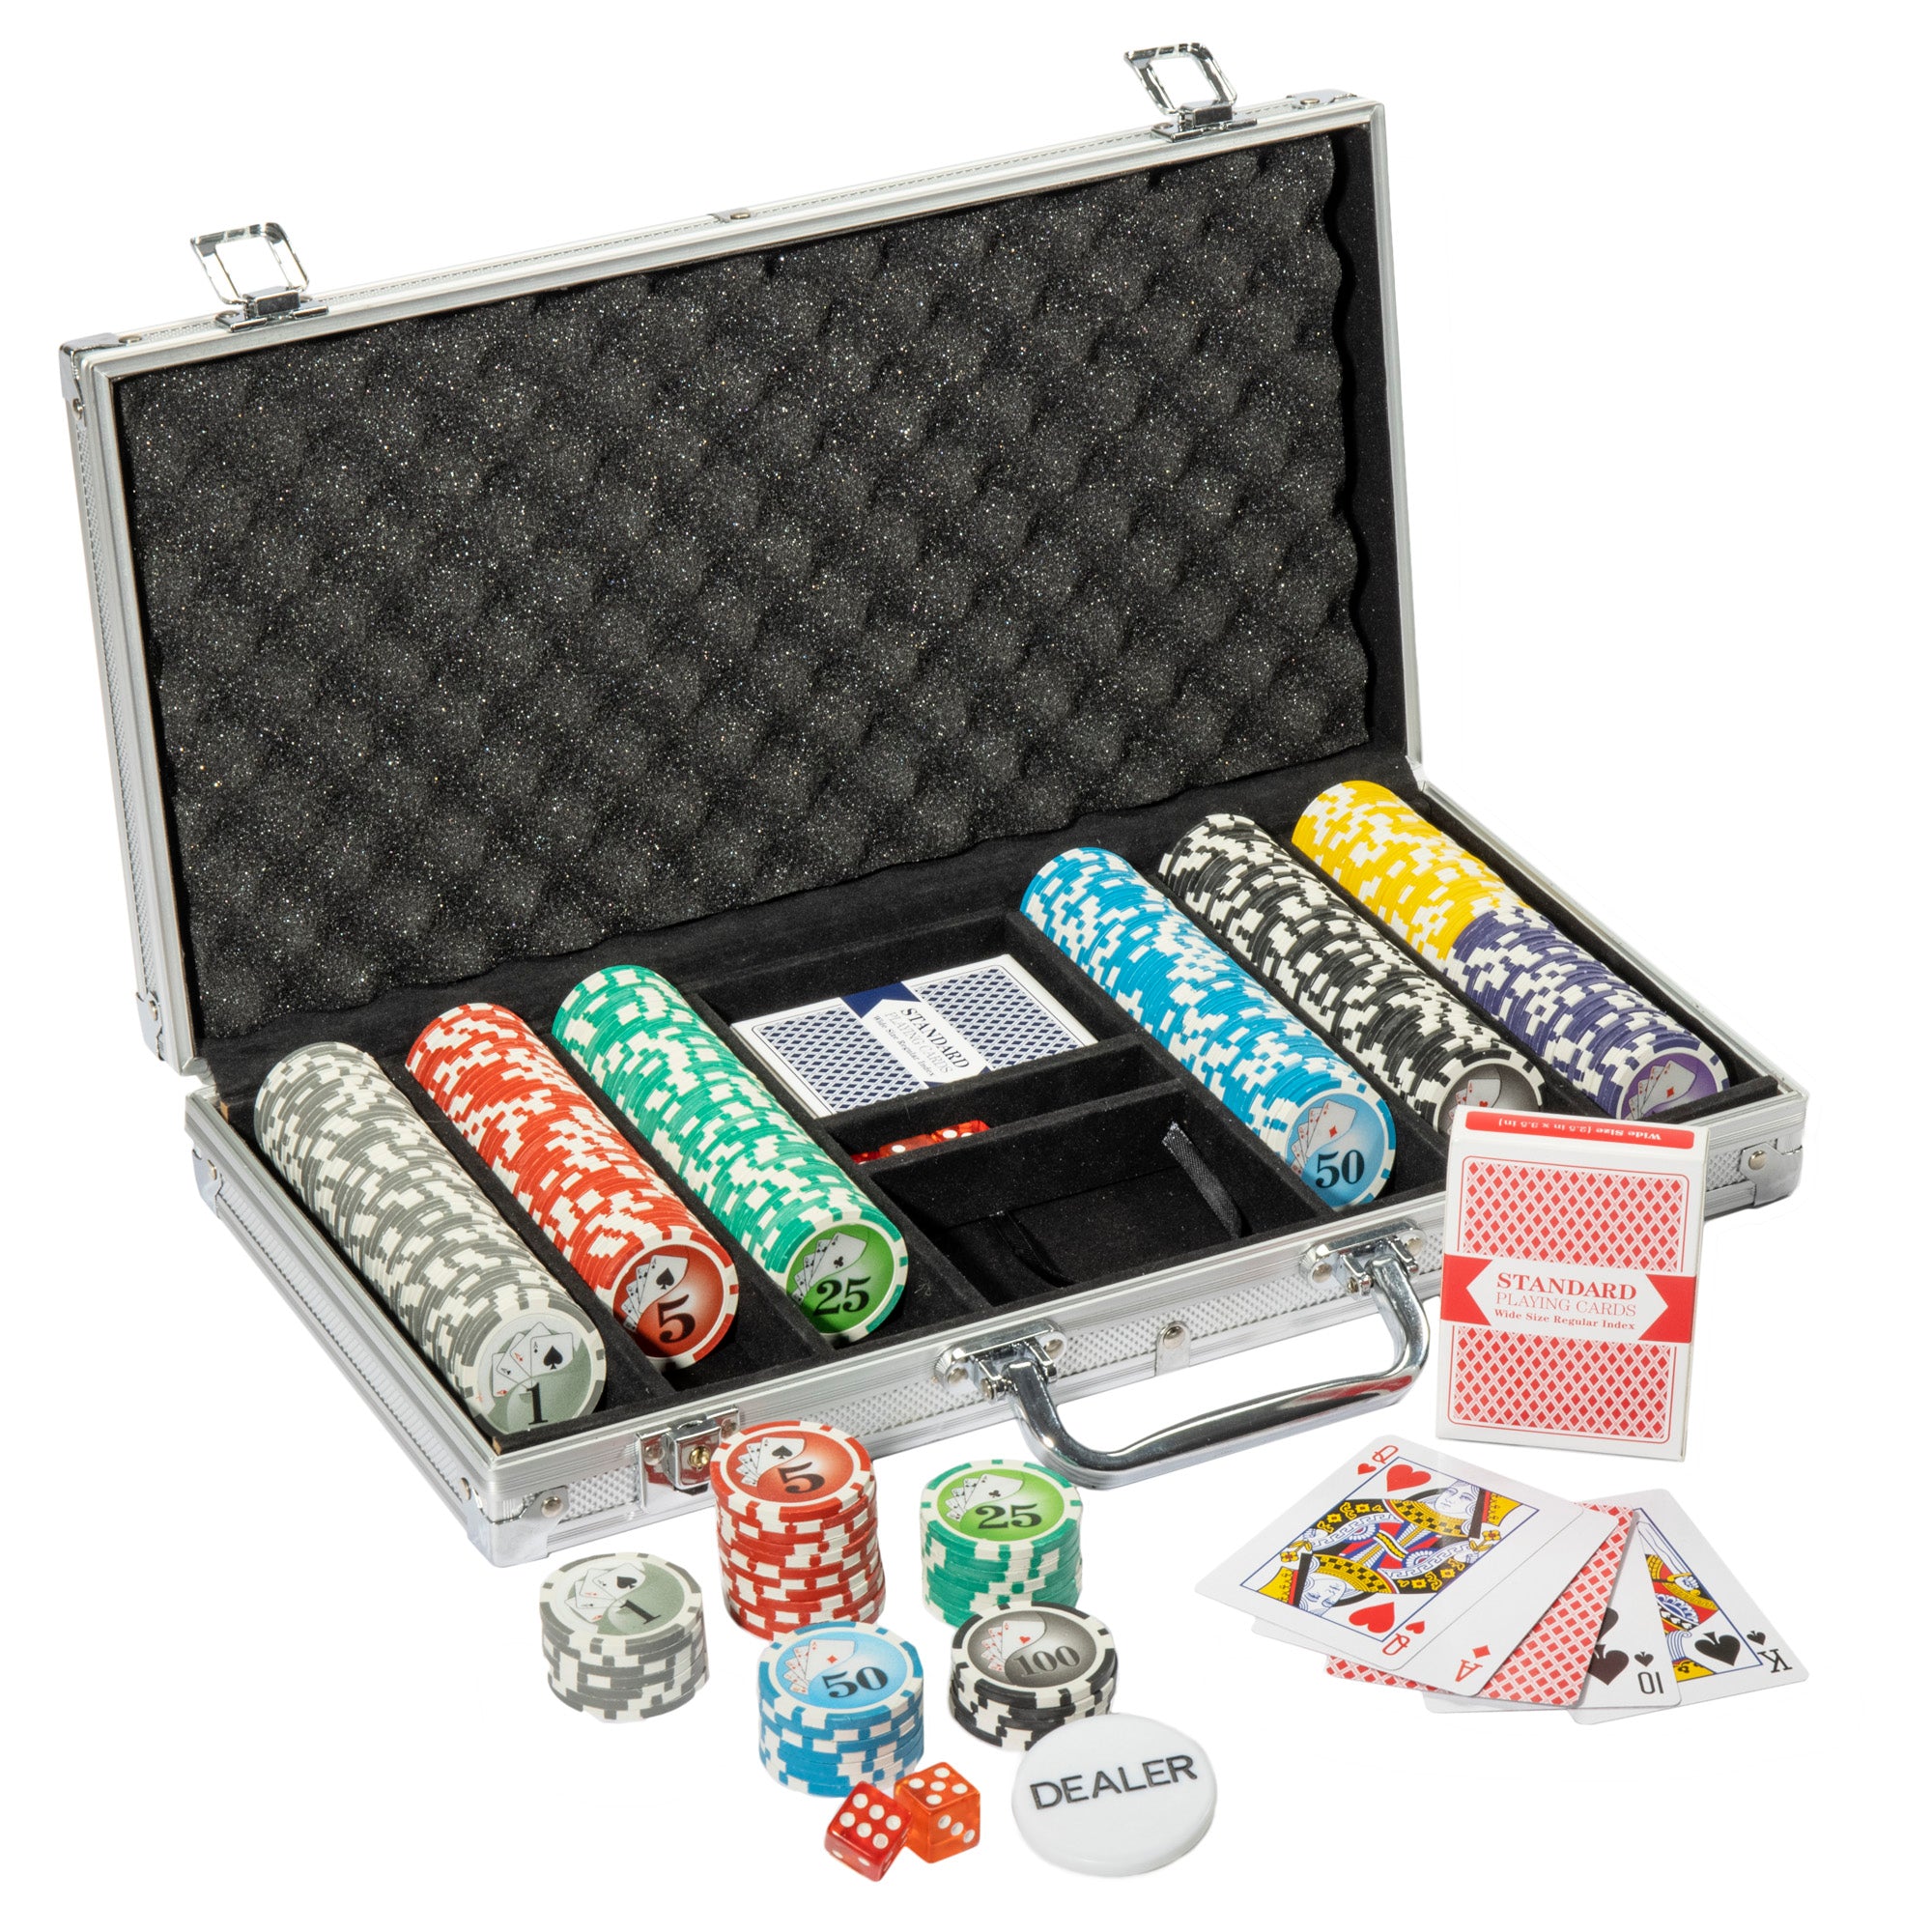 Yin Yang 14-gram Poker Chip Set in Aluminum Case (300 Count) - Clay Composite